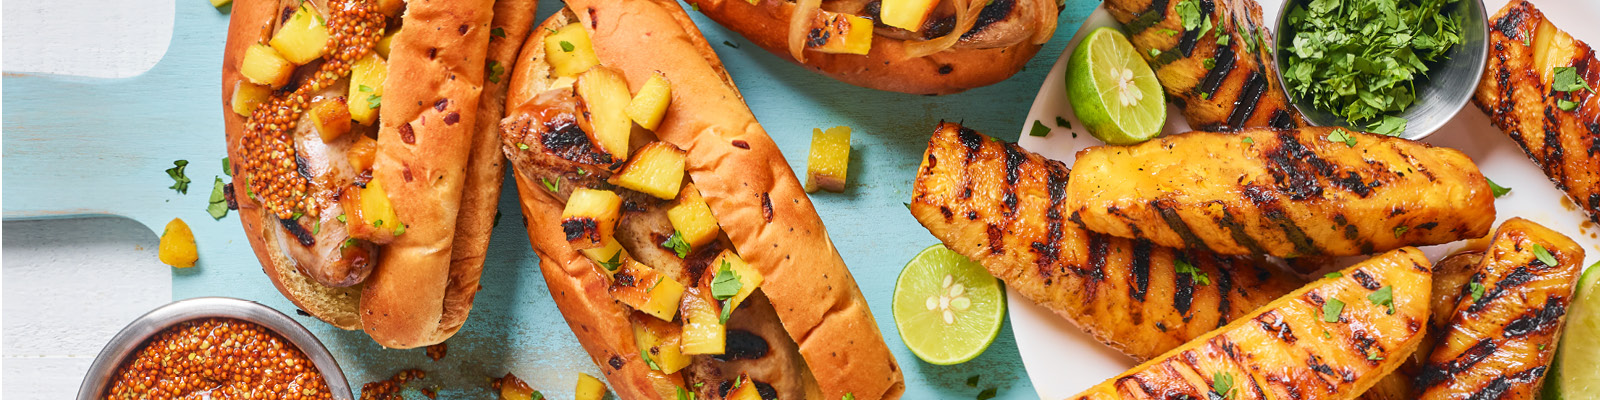 2020 May June CC_Brats and Grilled Pineapple_1600x400.jpg